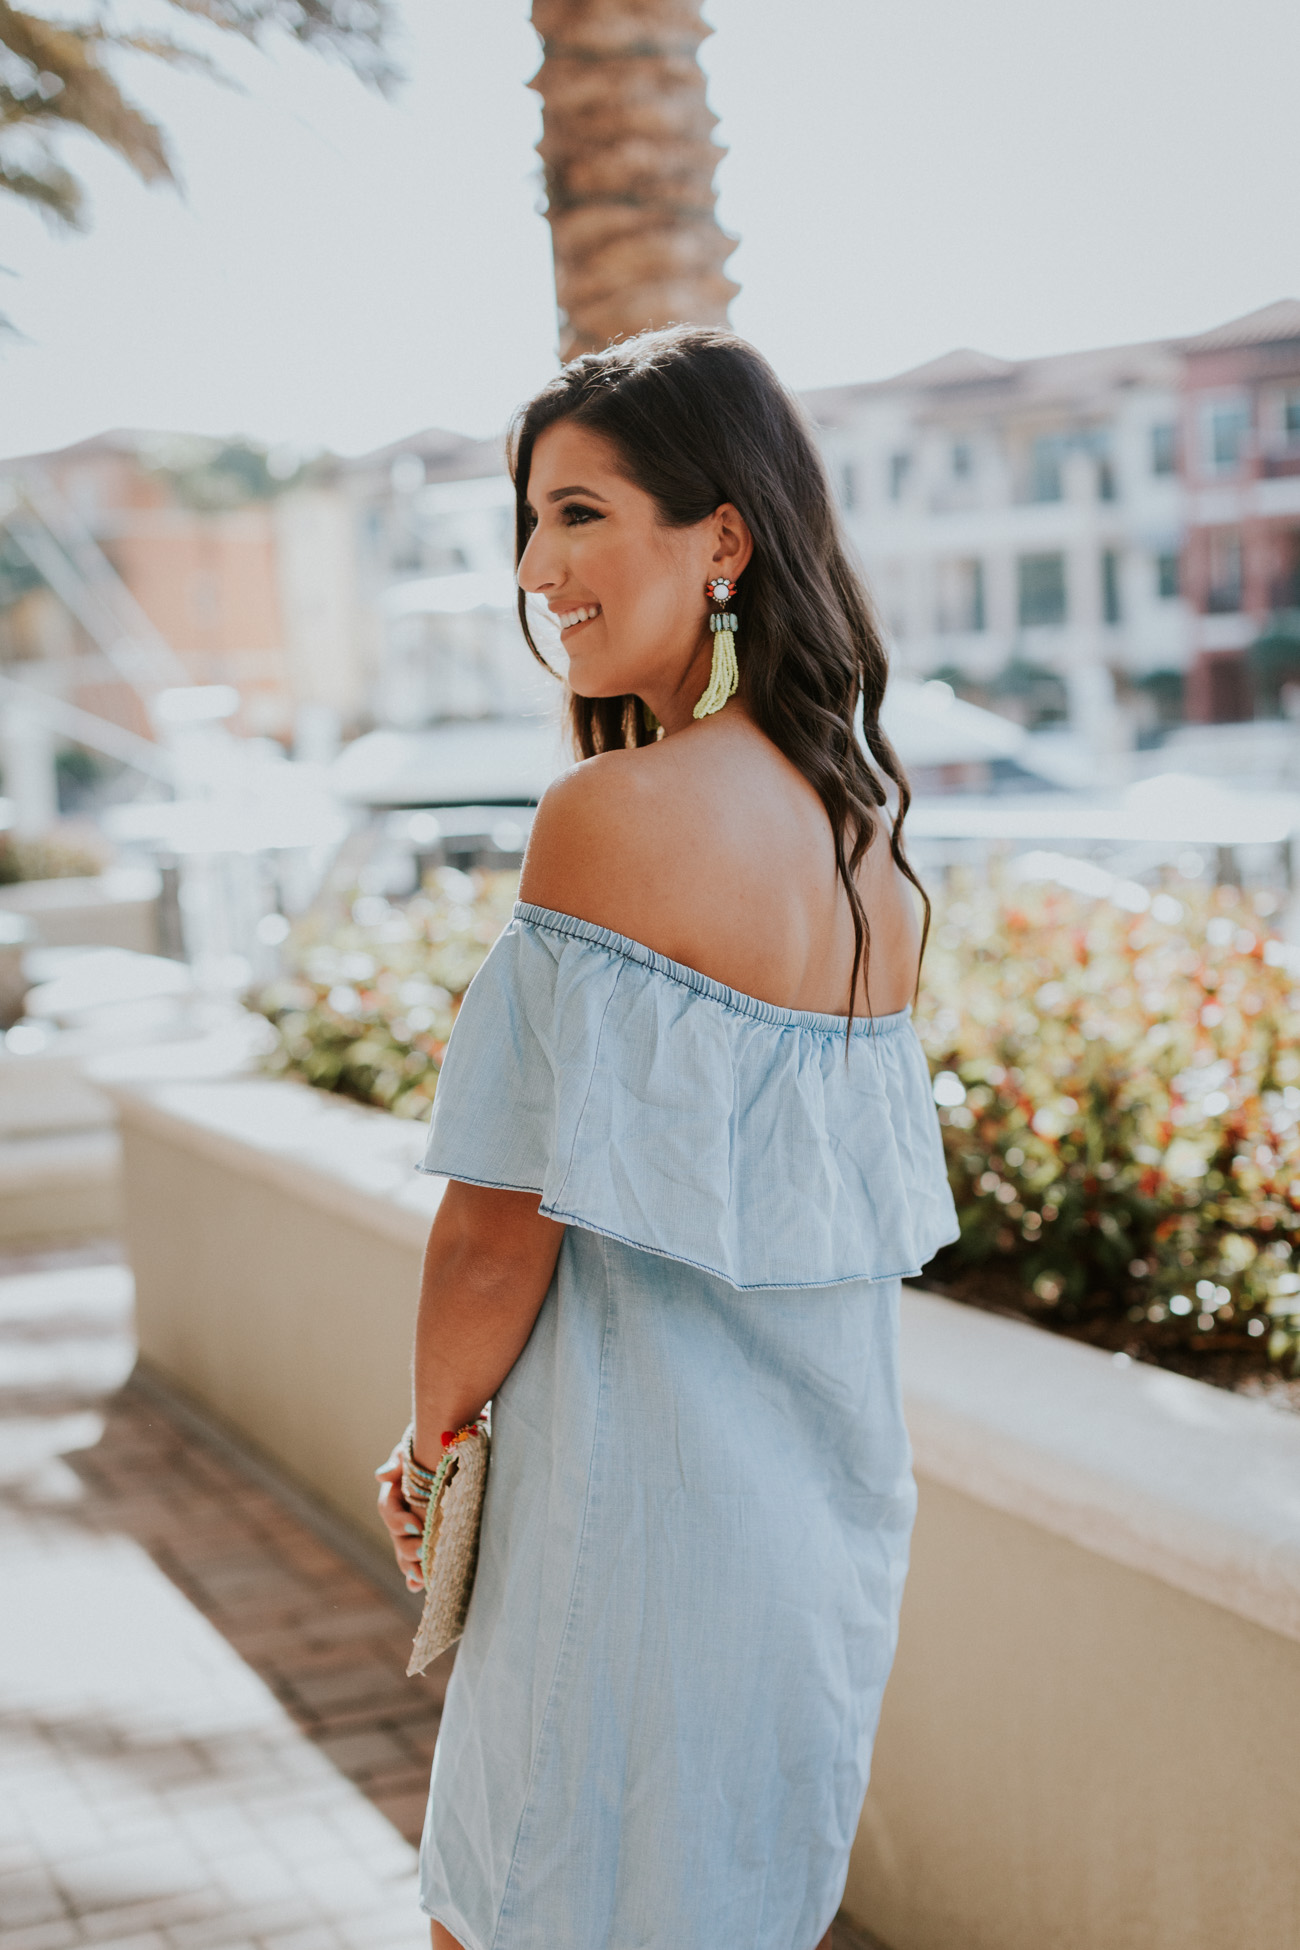 strappy neutral heels, embroidered clutch, tassel clutch, chambray off the shoulder dress, ruffle off the shoulder dress, chambray dress, embroidered clutch, vacation style, turquoise tassel earrings, nude wedges, strappy wedge sandals, tassel clutch // grace wainwright a southern drawl